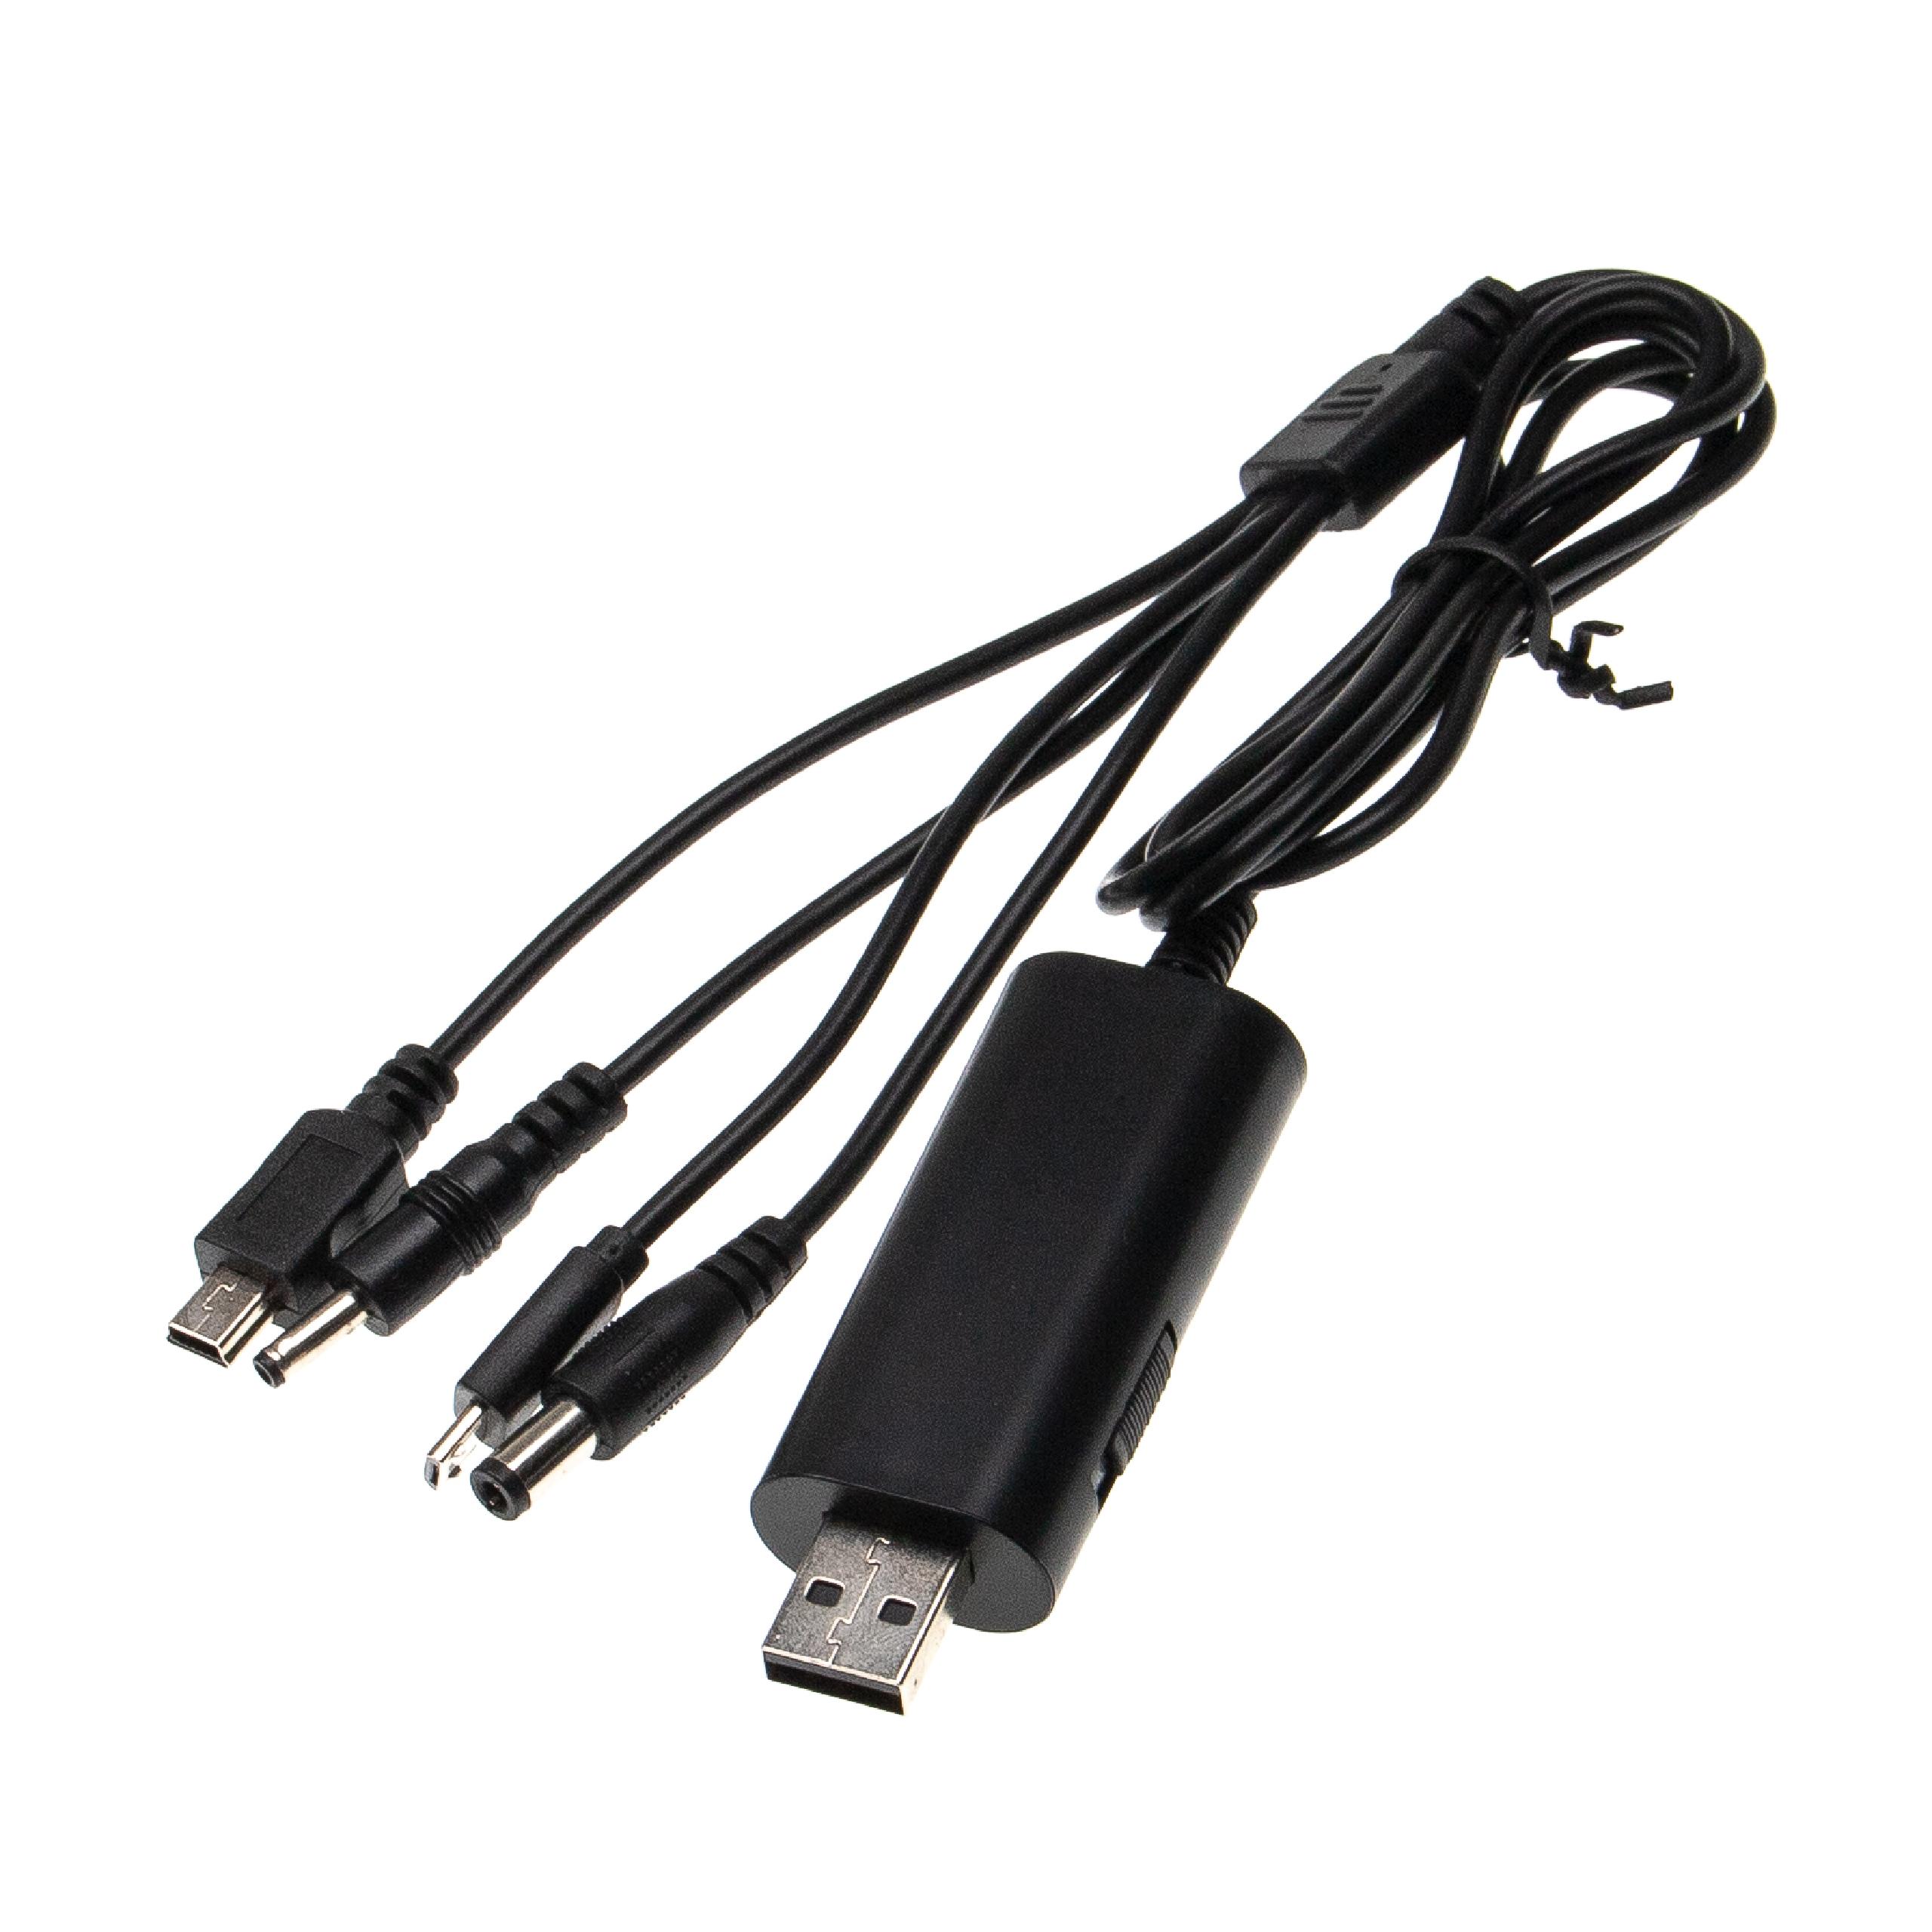 vhbw Universal Multi USB Cable for Diverse Appliances, e.g. Telephones, Mobiles, Smartphones - 4-in-1 Adapter 